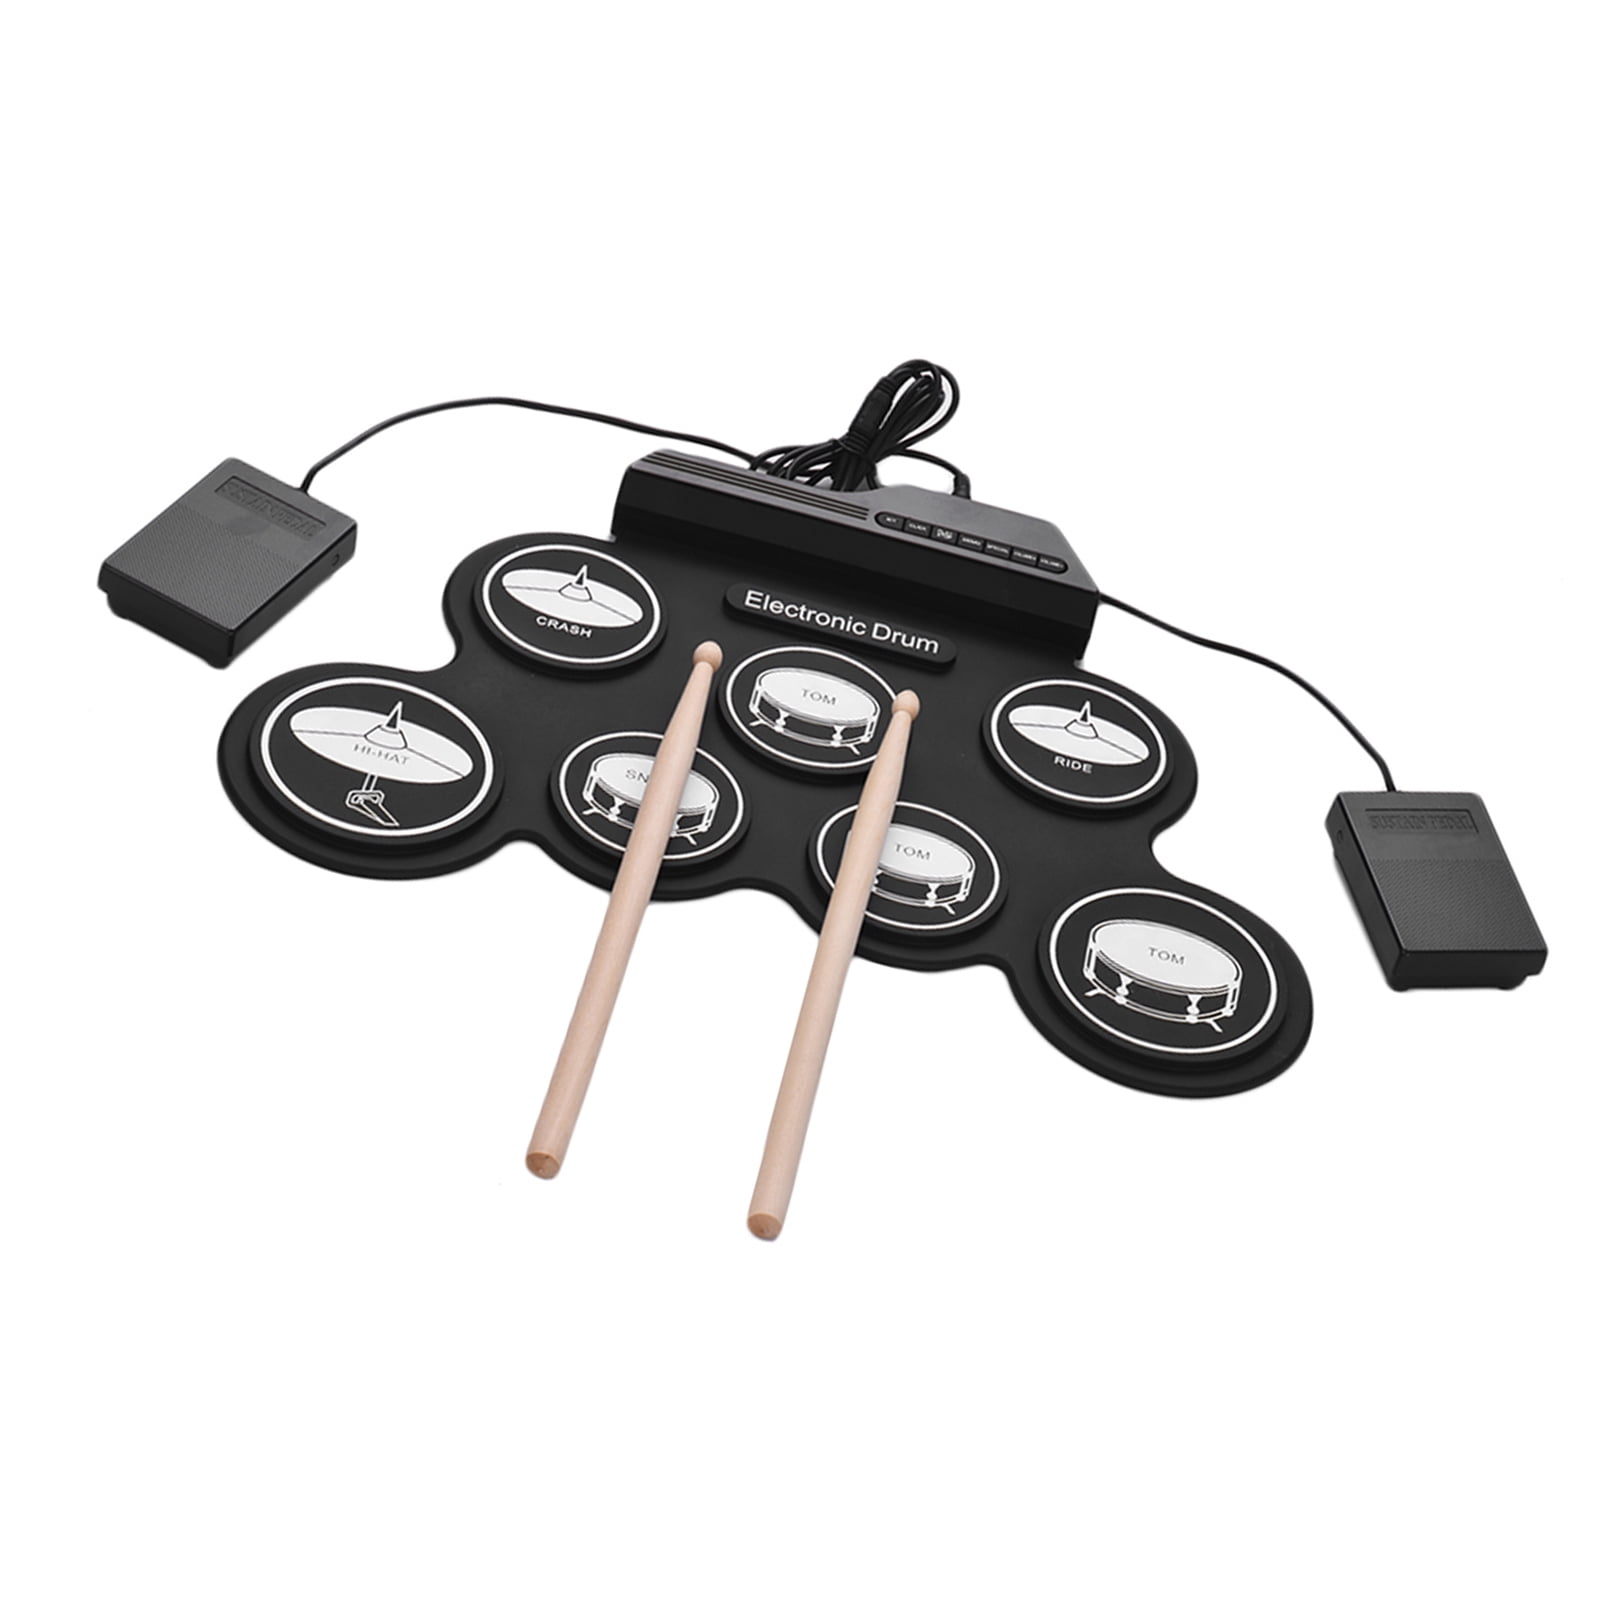 Practice Pad Kit with USB MIDI Jack for Beginners Kids Birthday Gift Quick Setup Protable Roll Up Drum Kit W/ 9 Electric Drum Pads Foot Pedals Built in Drum Stick Electronic Drum Set 